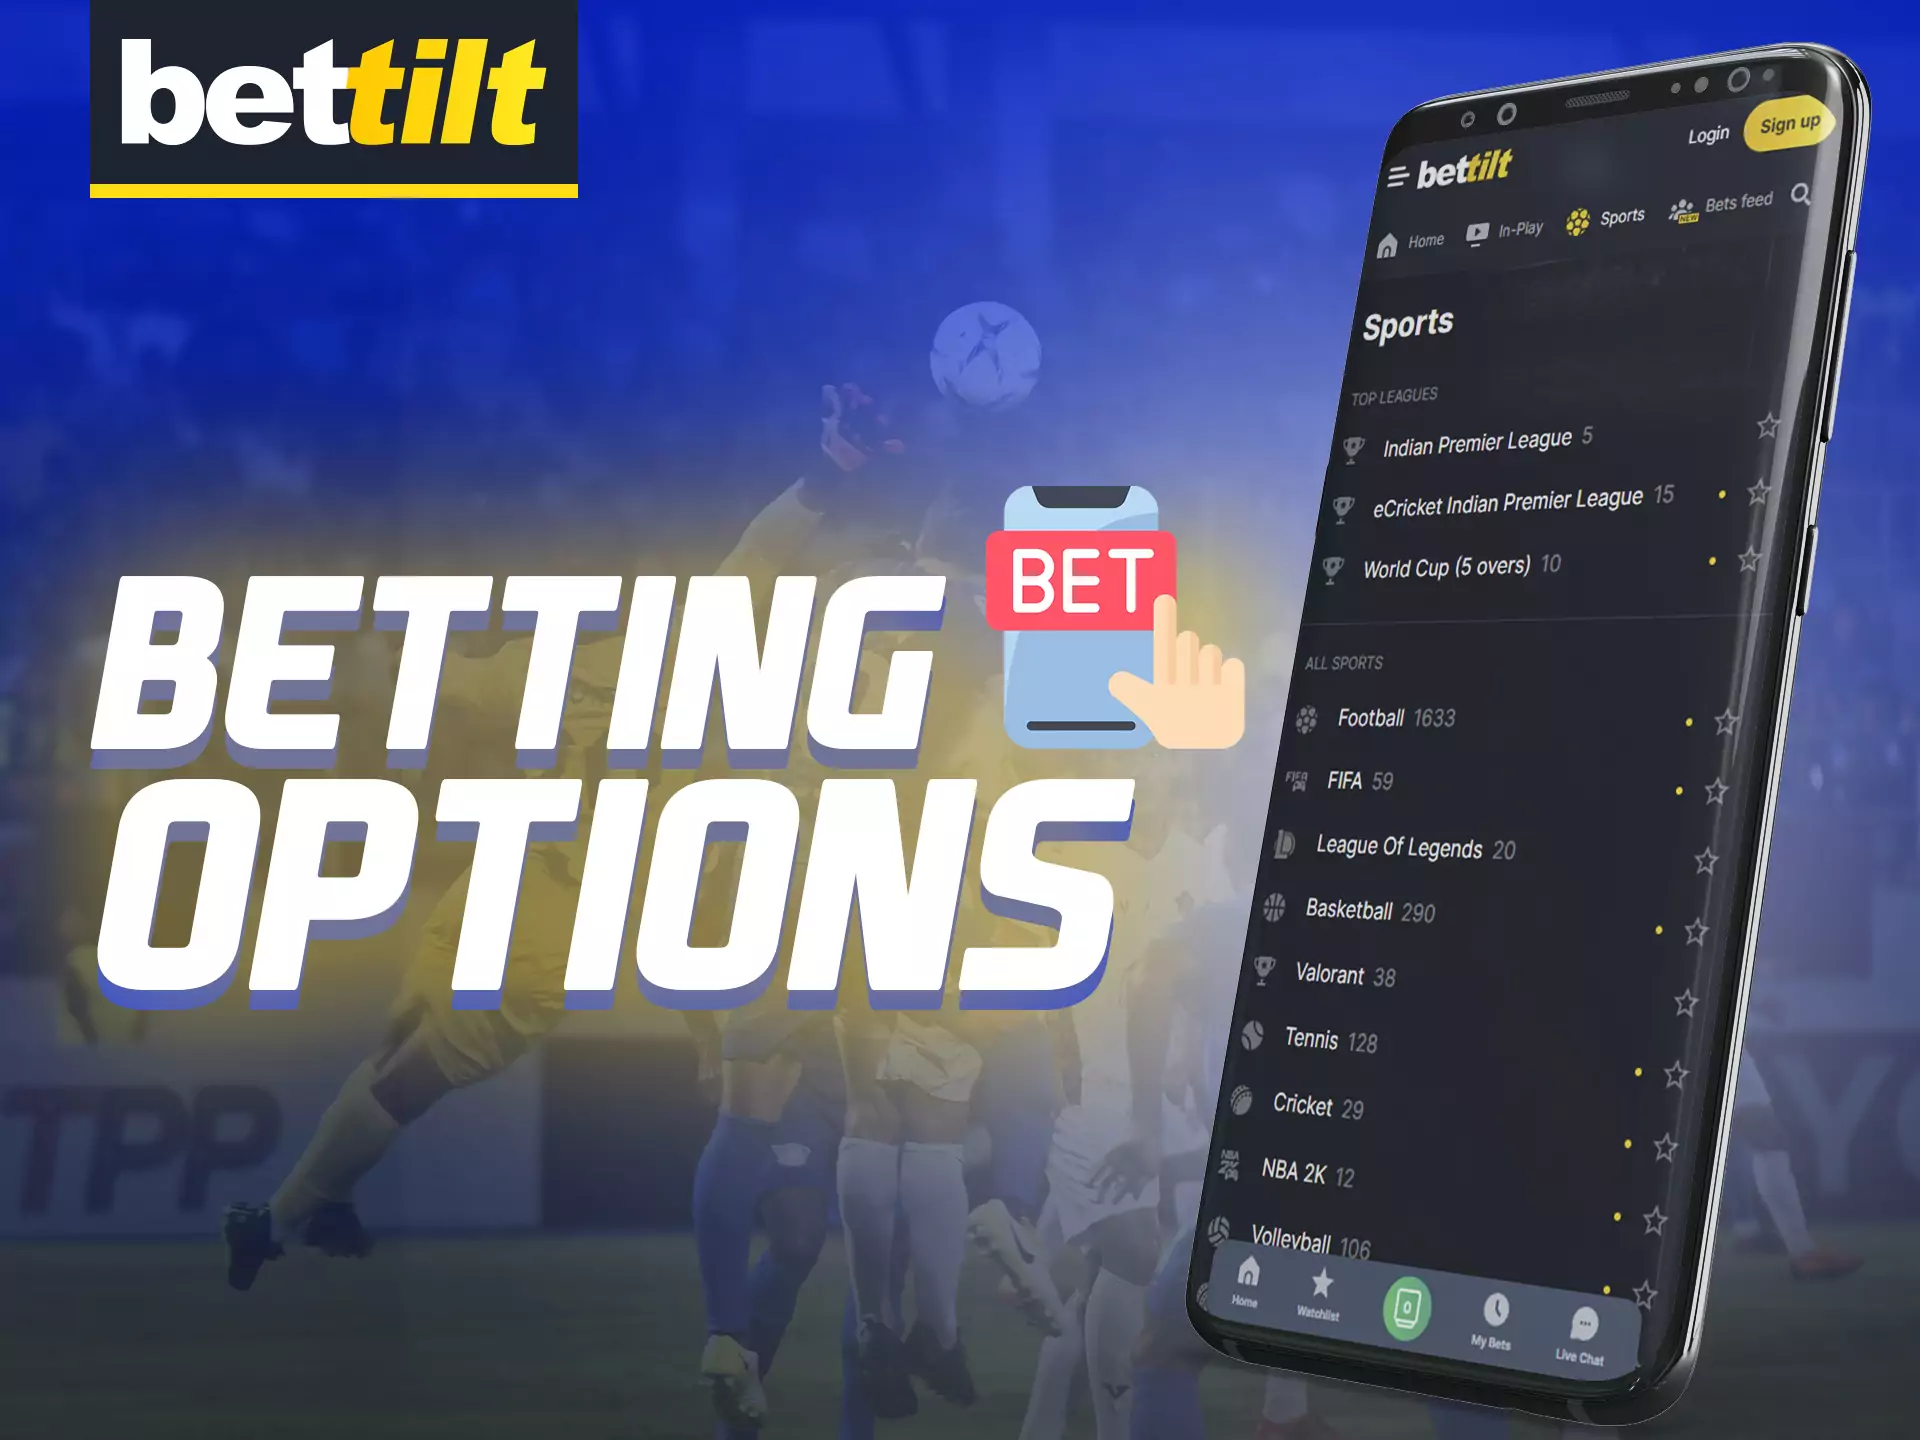 In the Bettilt app you can try different betting options.